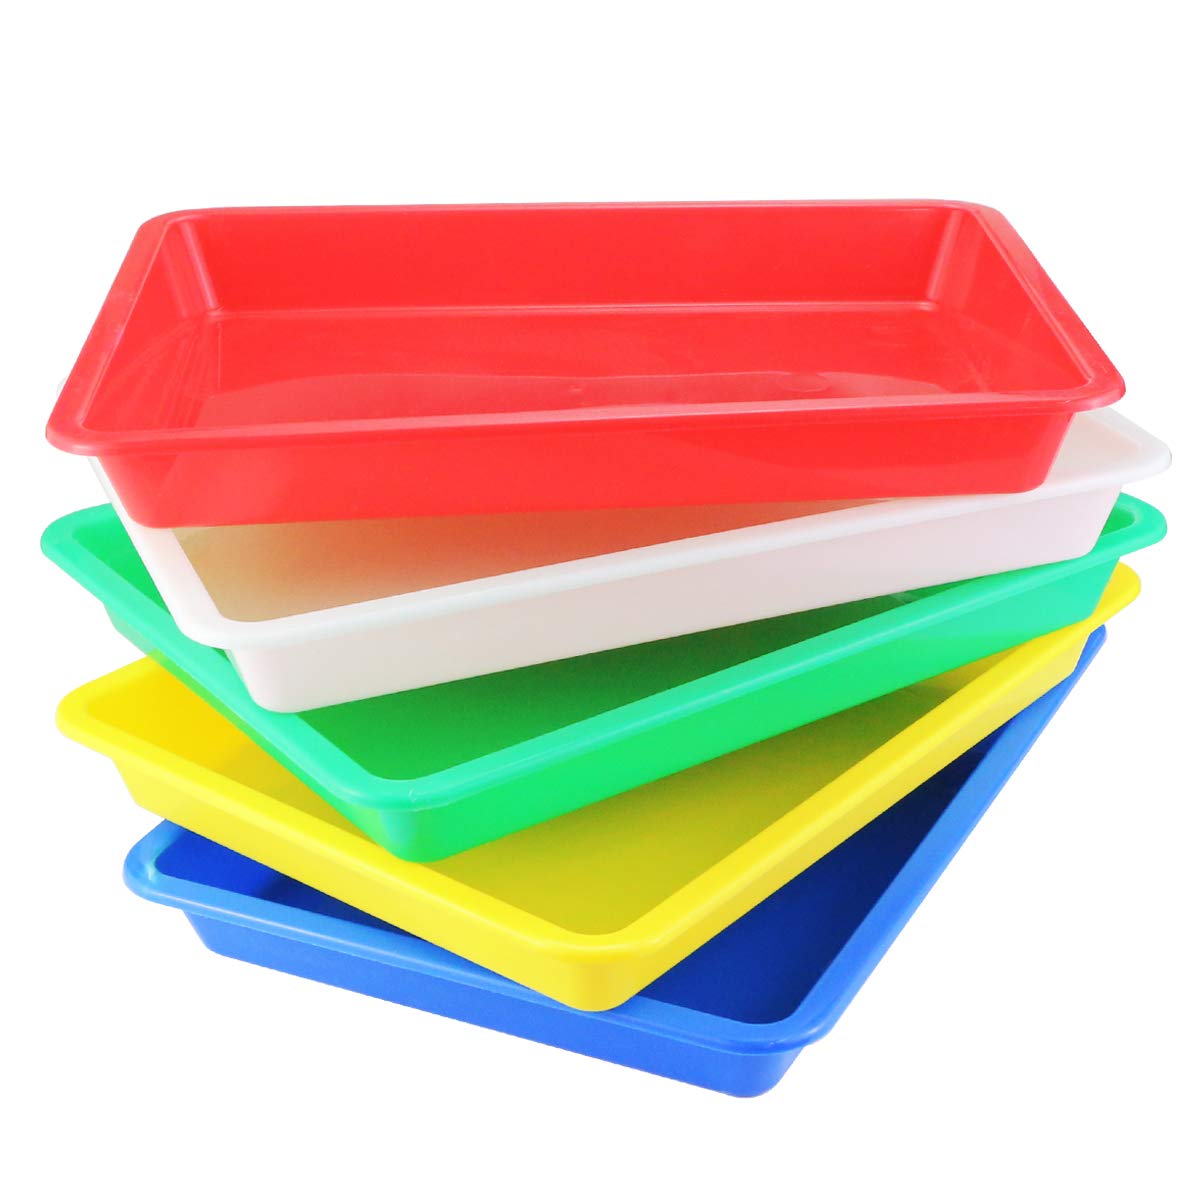 5 Pack Multicolor Plastic Art Trays - Activity Tray Crafts Organizer Tray Serving Tray for School Home Art and Crafts, DIY Projects, Painting, Beads, Organizing Supply, 5 Color